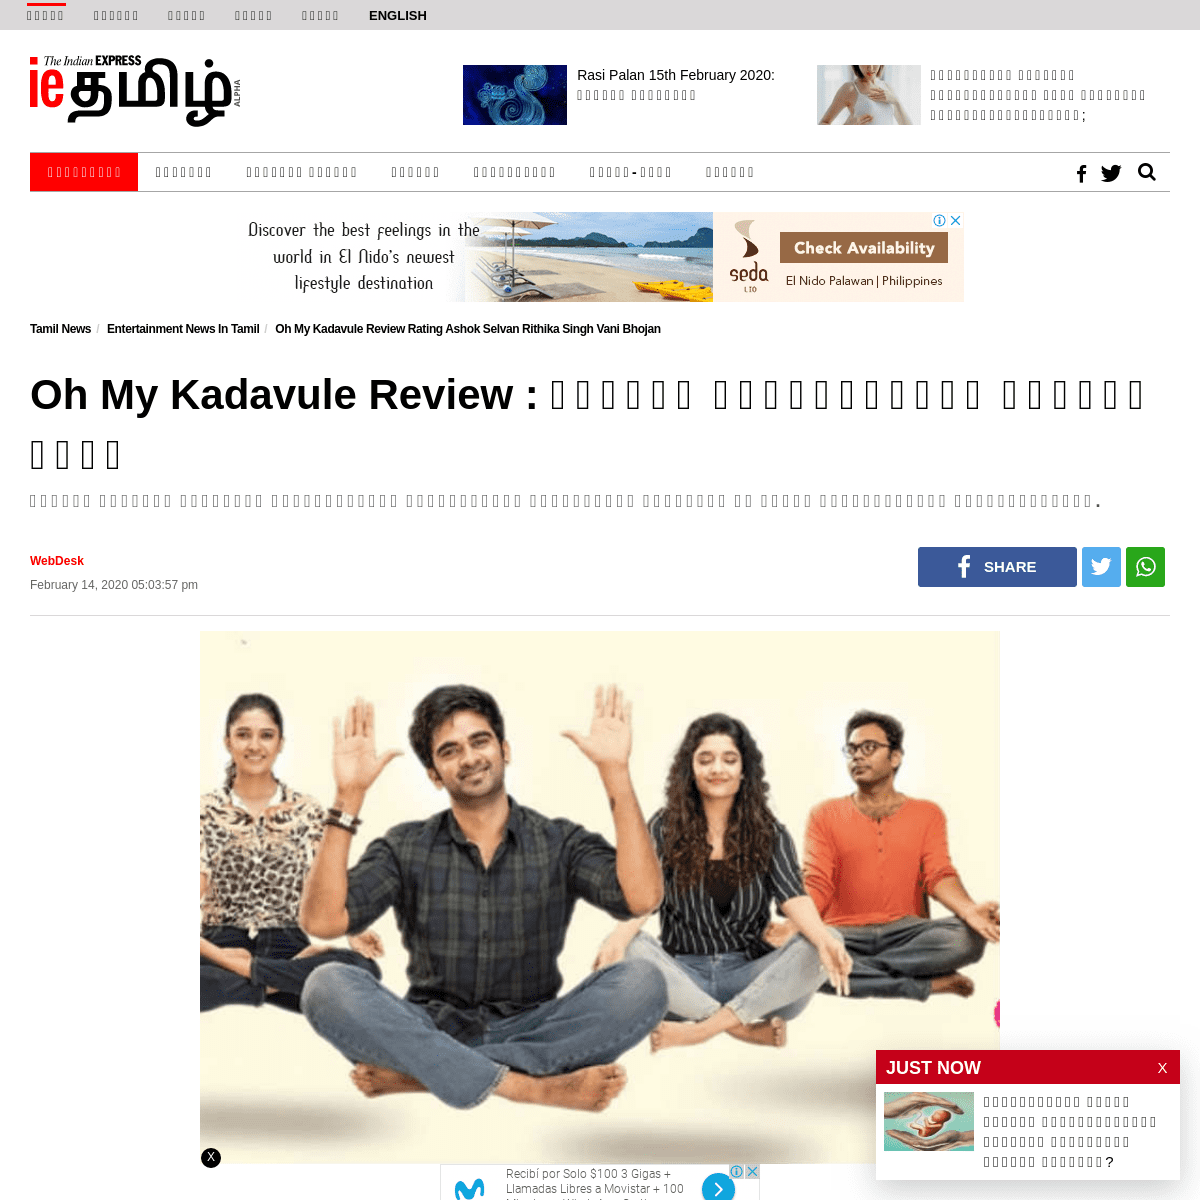 A complete backup of tamil.indianexpress.com/entertainment/oh-my-kadavule-review-rating-ashok-selvan-rithika-singh-vani-bhojan/